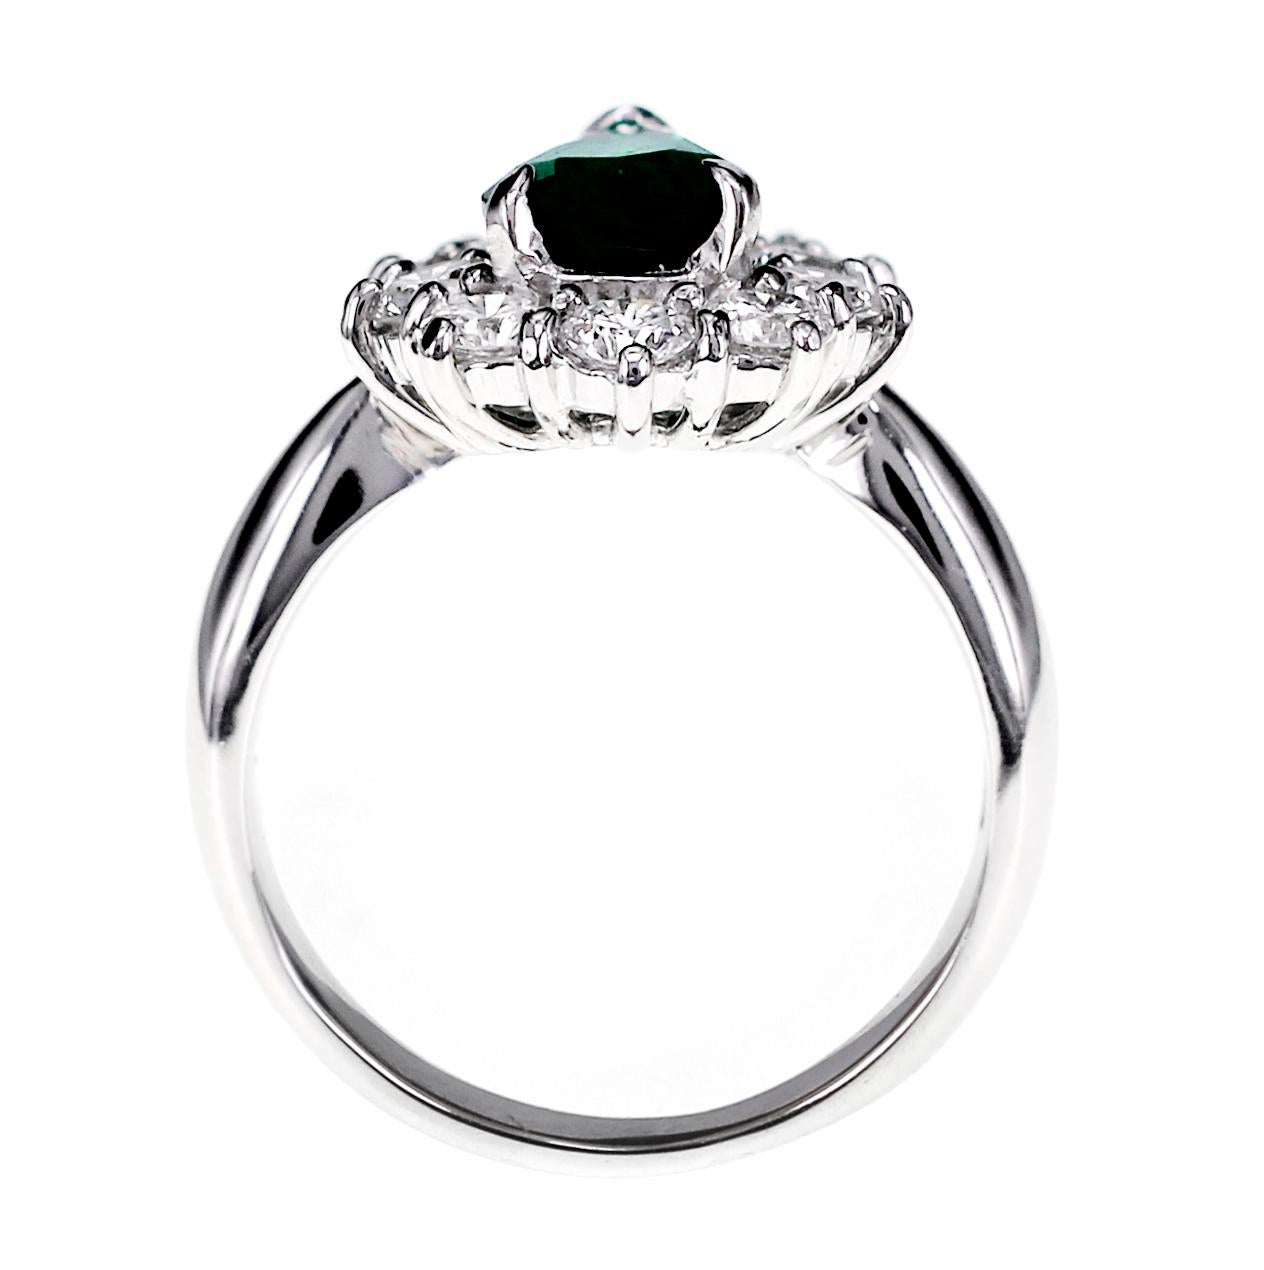 Platinum 1.29 Carat Vivid Green Zambian Emerald and Diamond Wedding Ring In New Condition For Sale In Hung Hom, HK